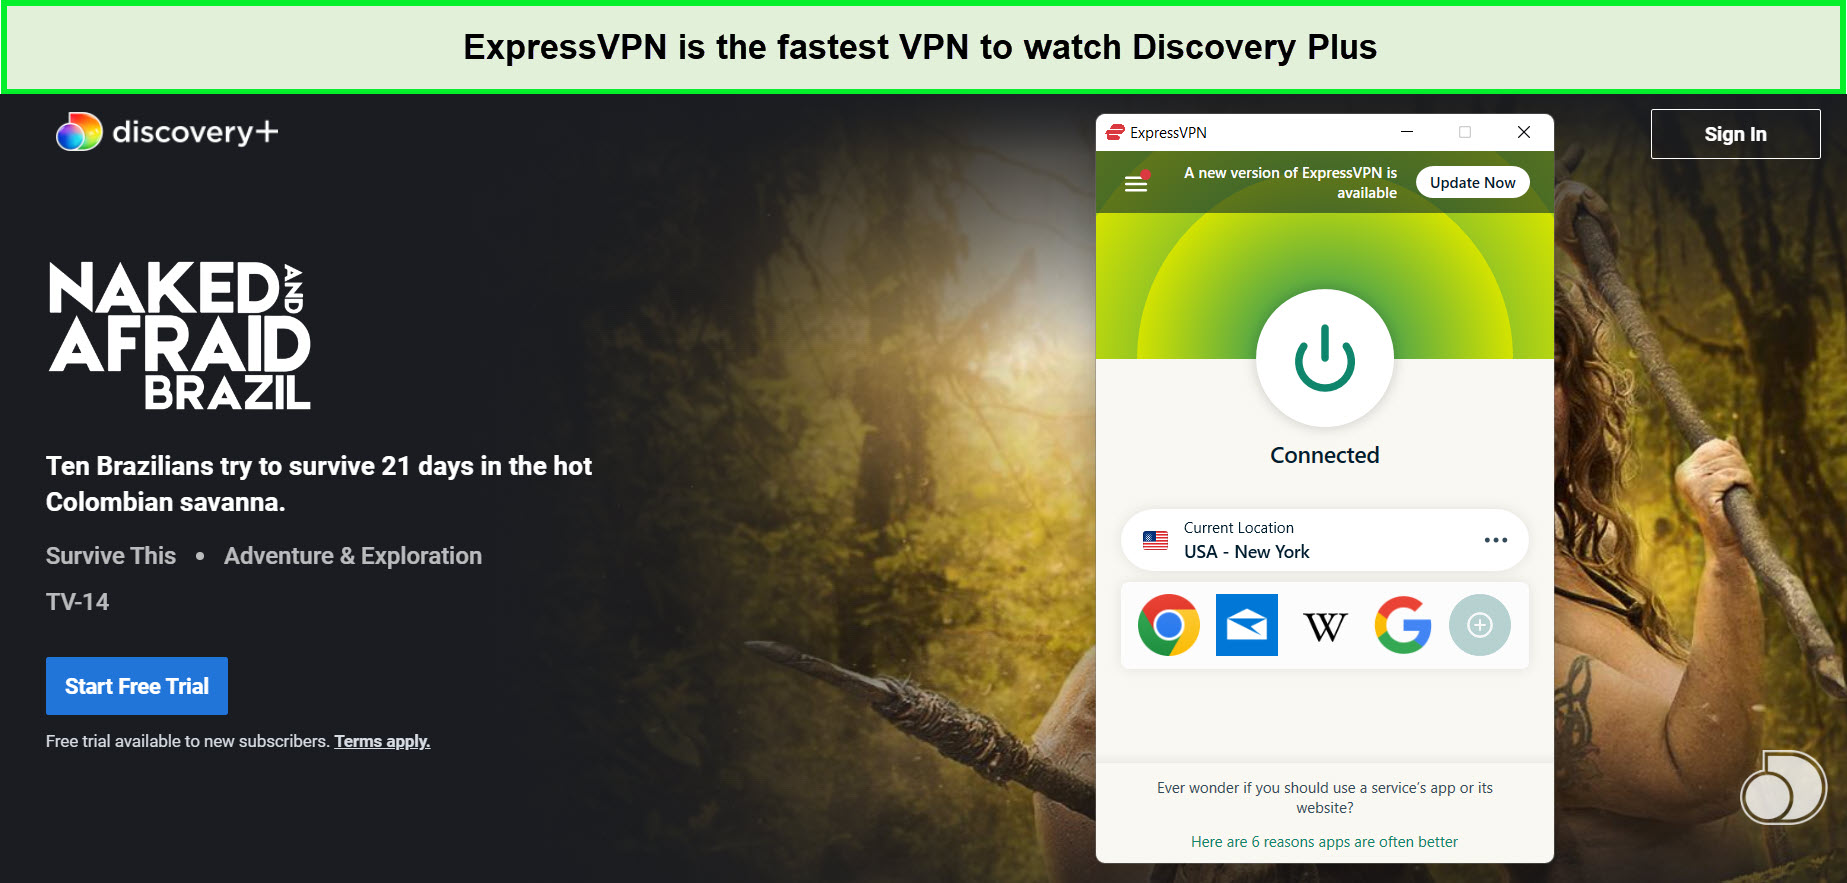 expressvpn-is-the-best-vpn-to-watch-naked-and-afraid-brazil-season-16-on-discovery-plus-in-new-zealand